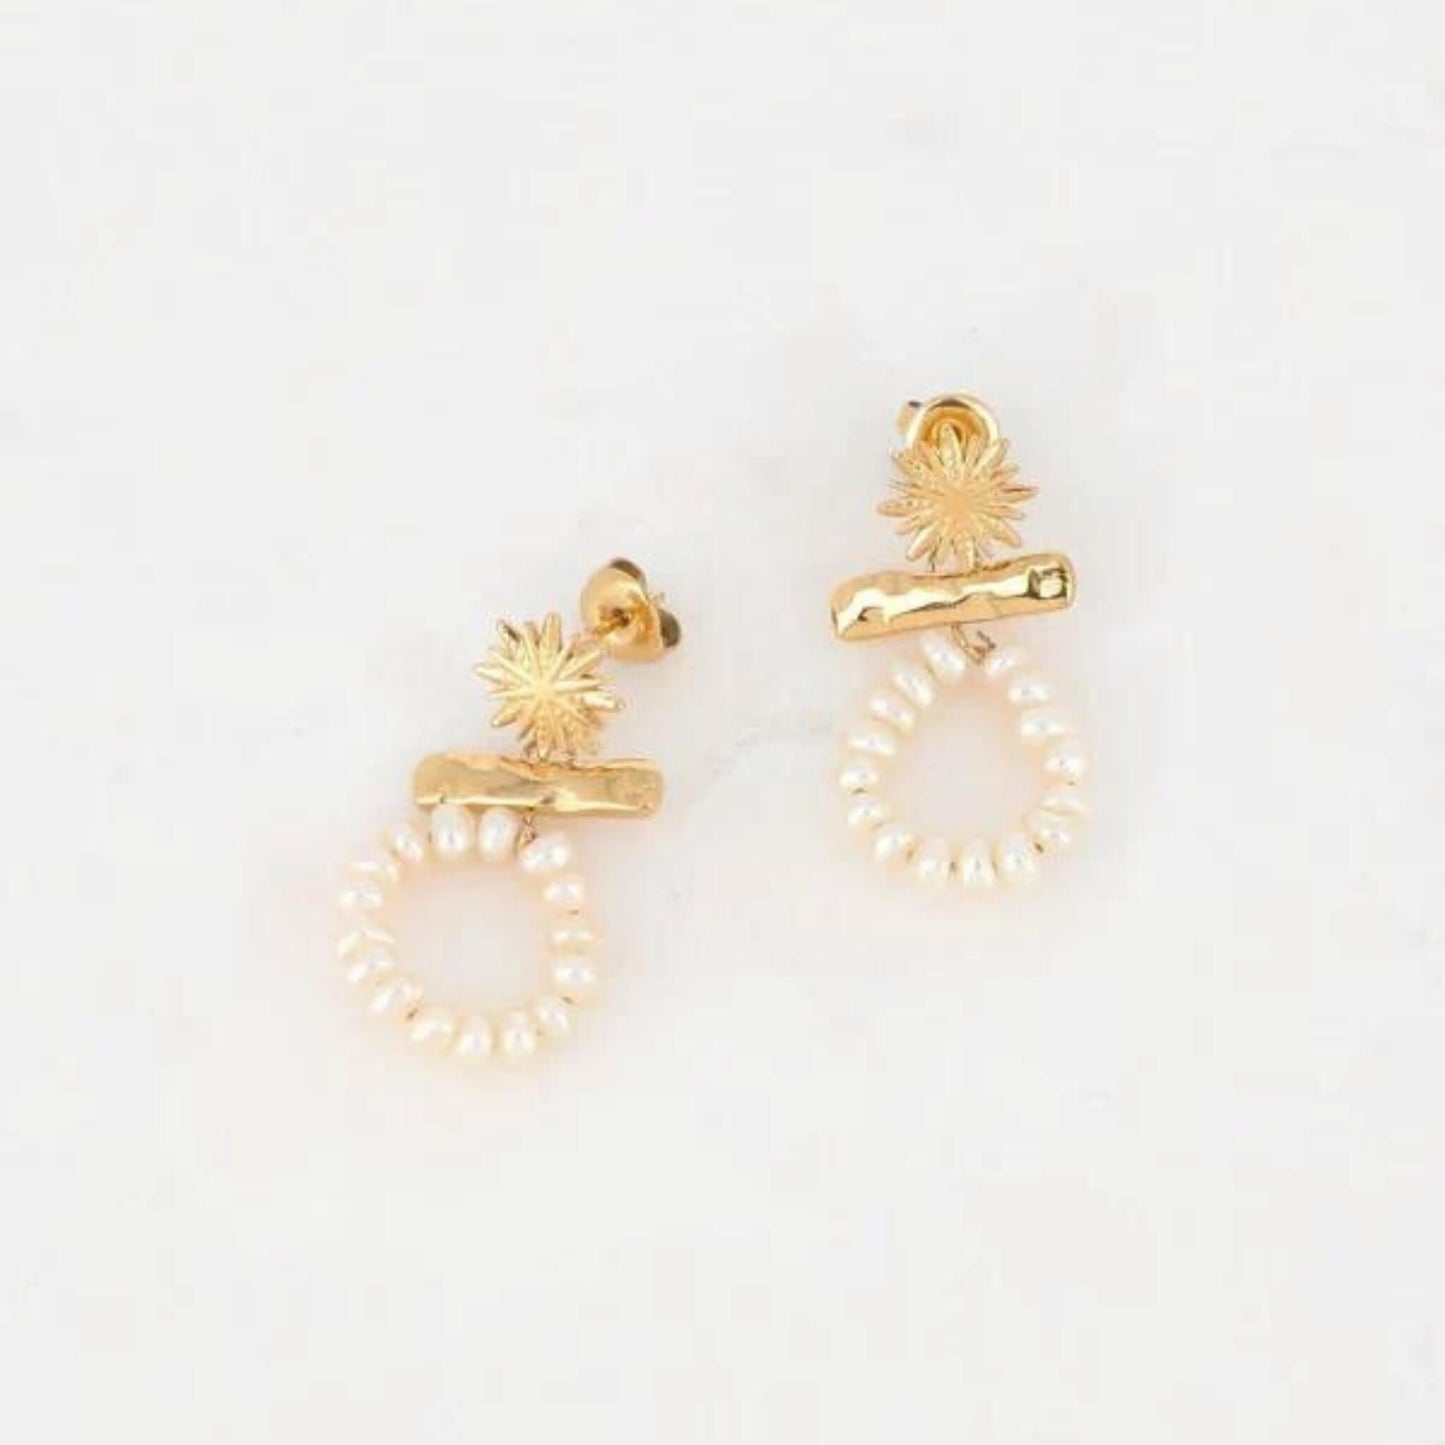 Golden Athéalista earrings with freshwater pearls - Unik by Nature